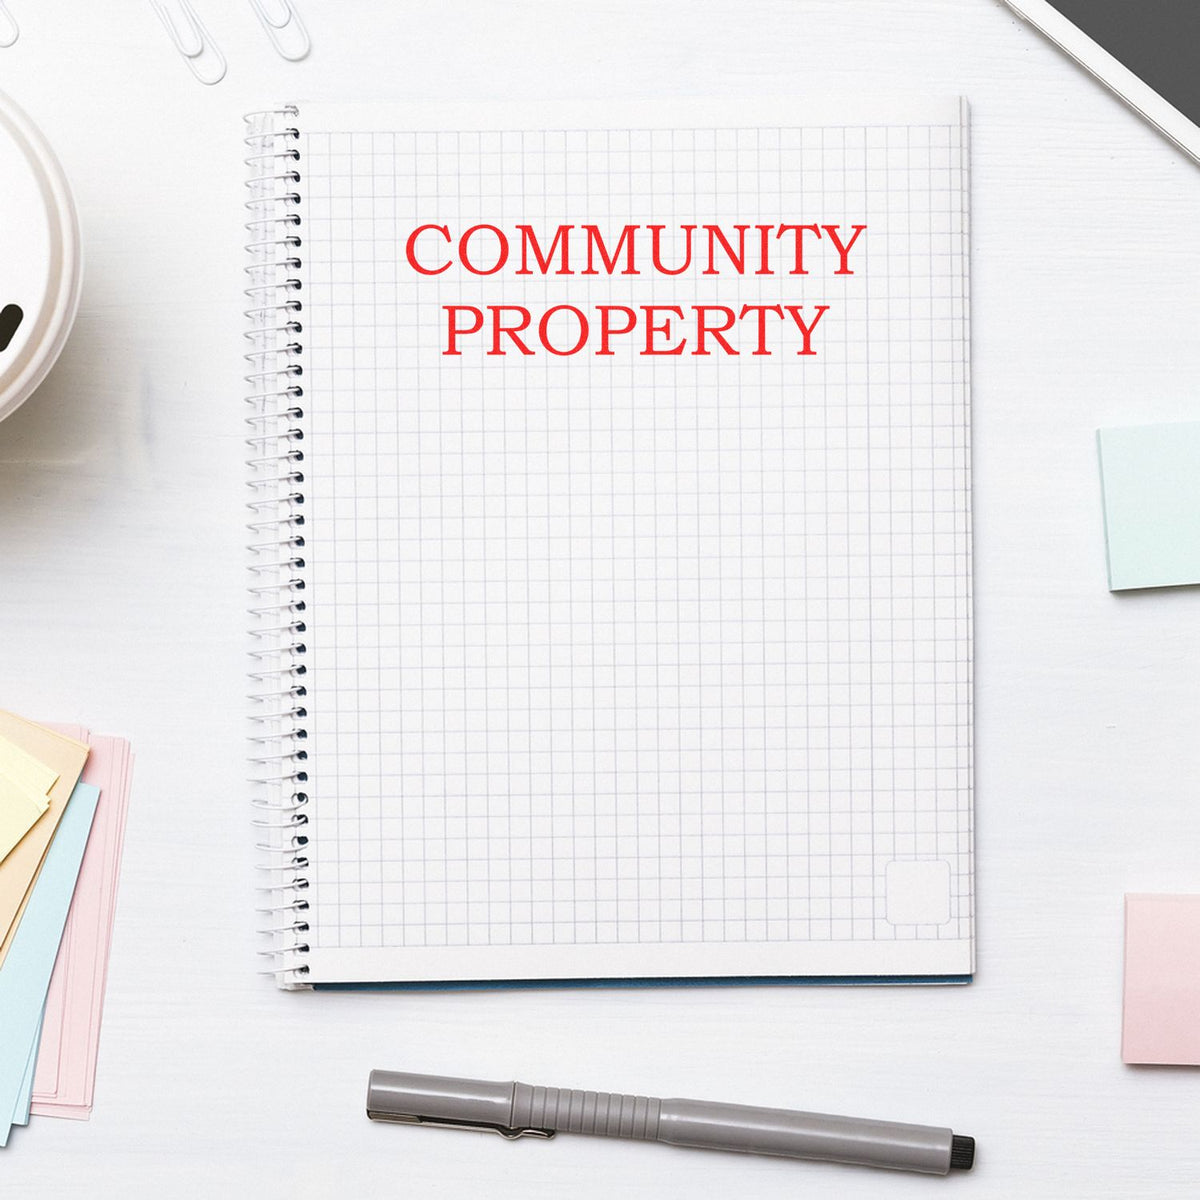 Community Property Rubber Stamp In Use Photo